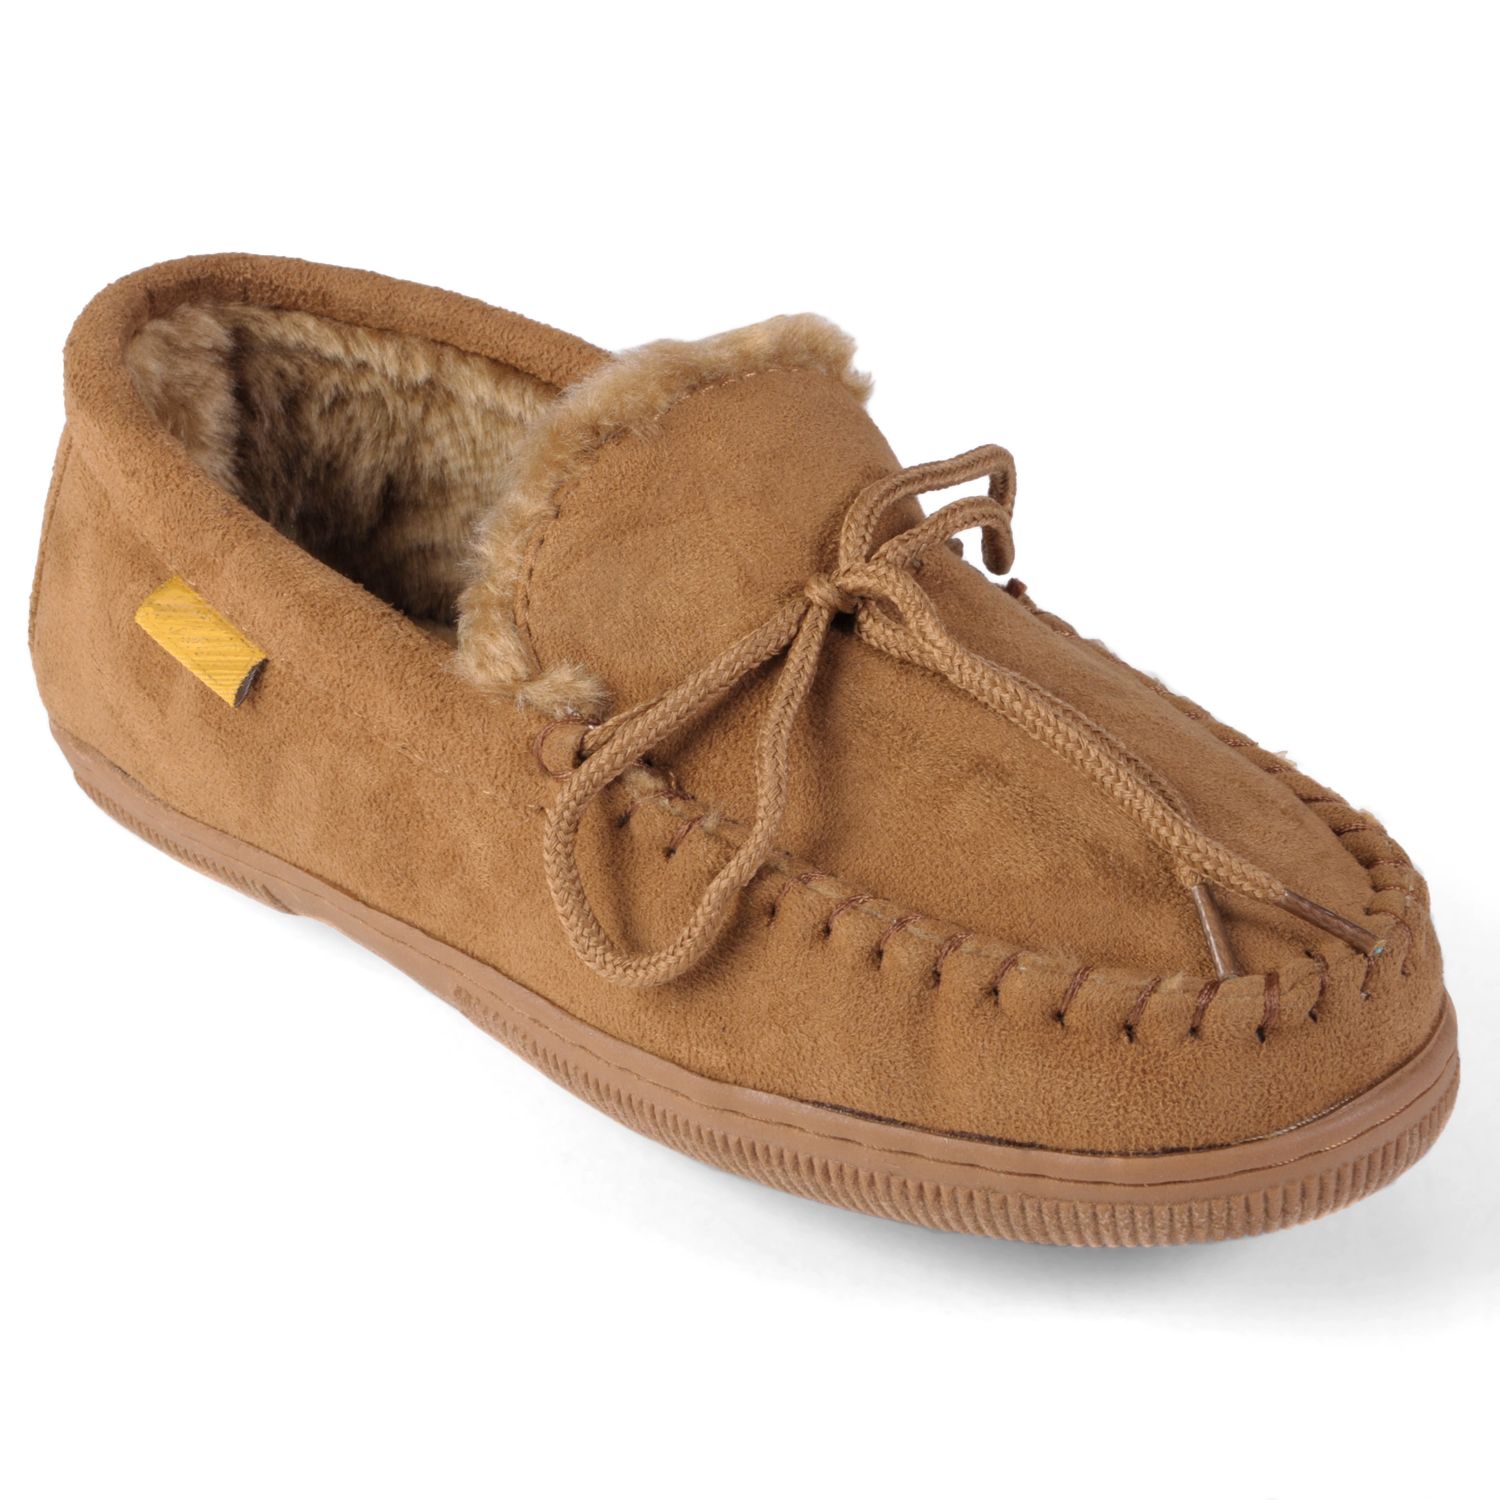 mens wide moccasin slippers